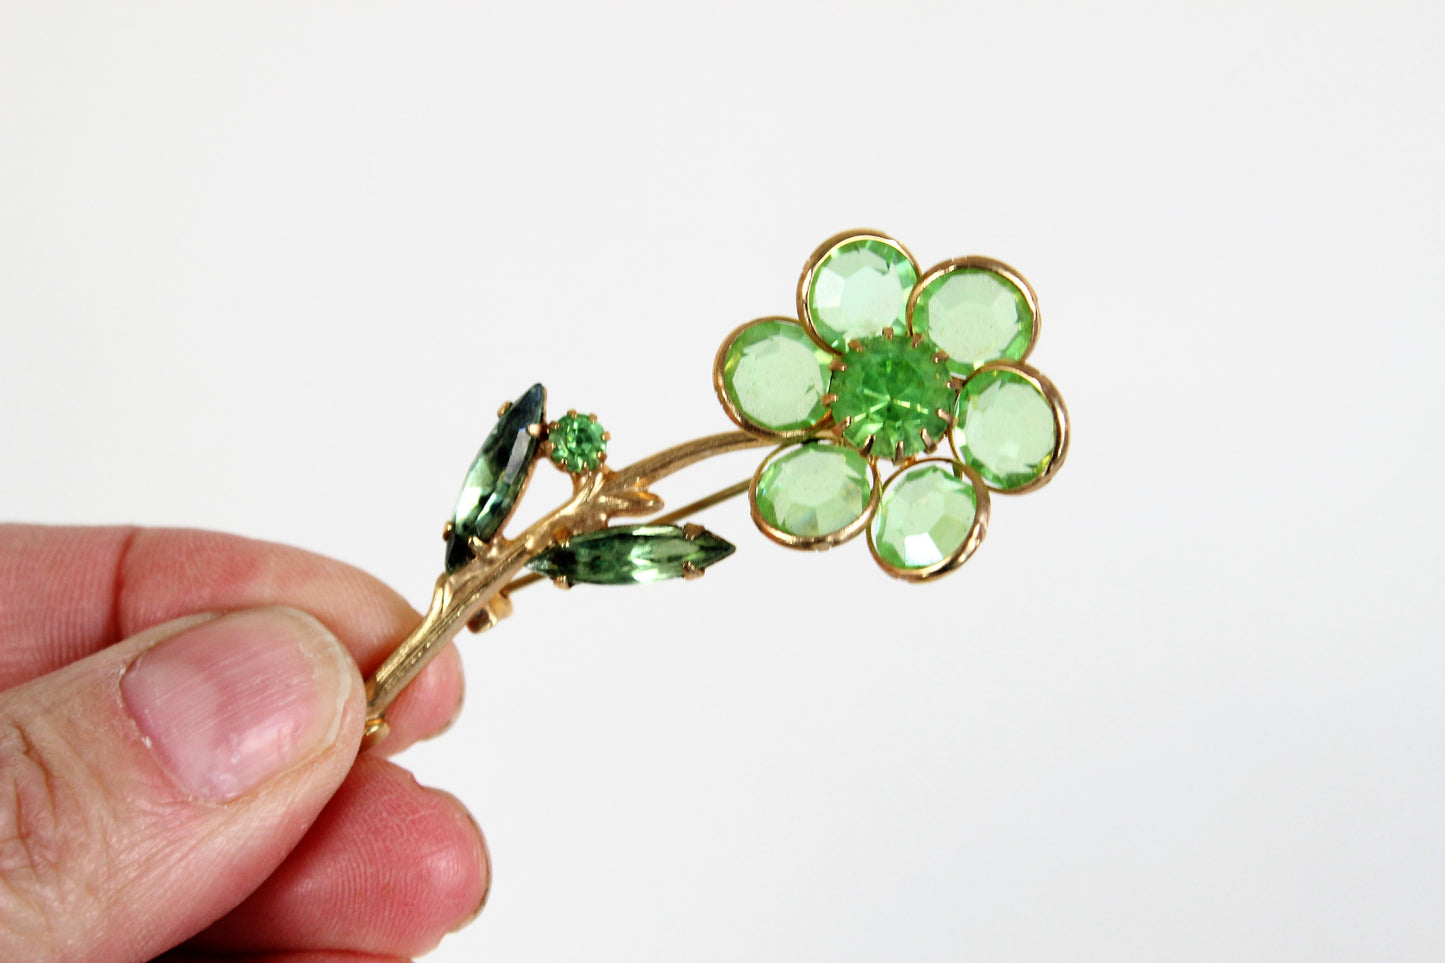 Vintage 1960s Green Glass Daisy Flower Pin